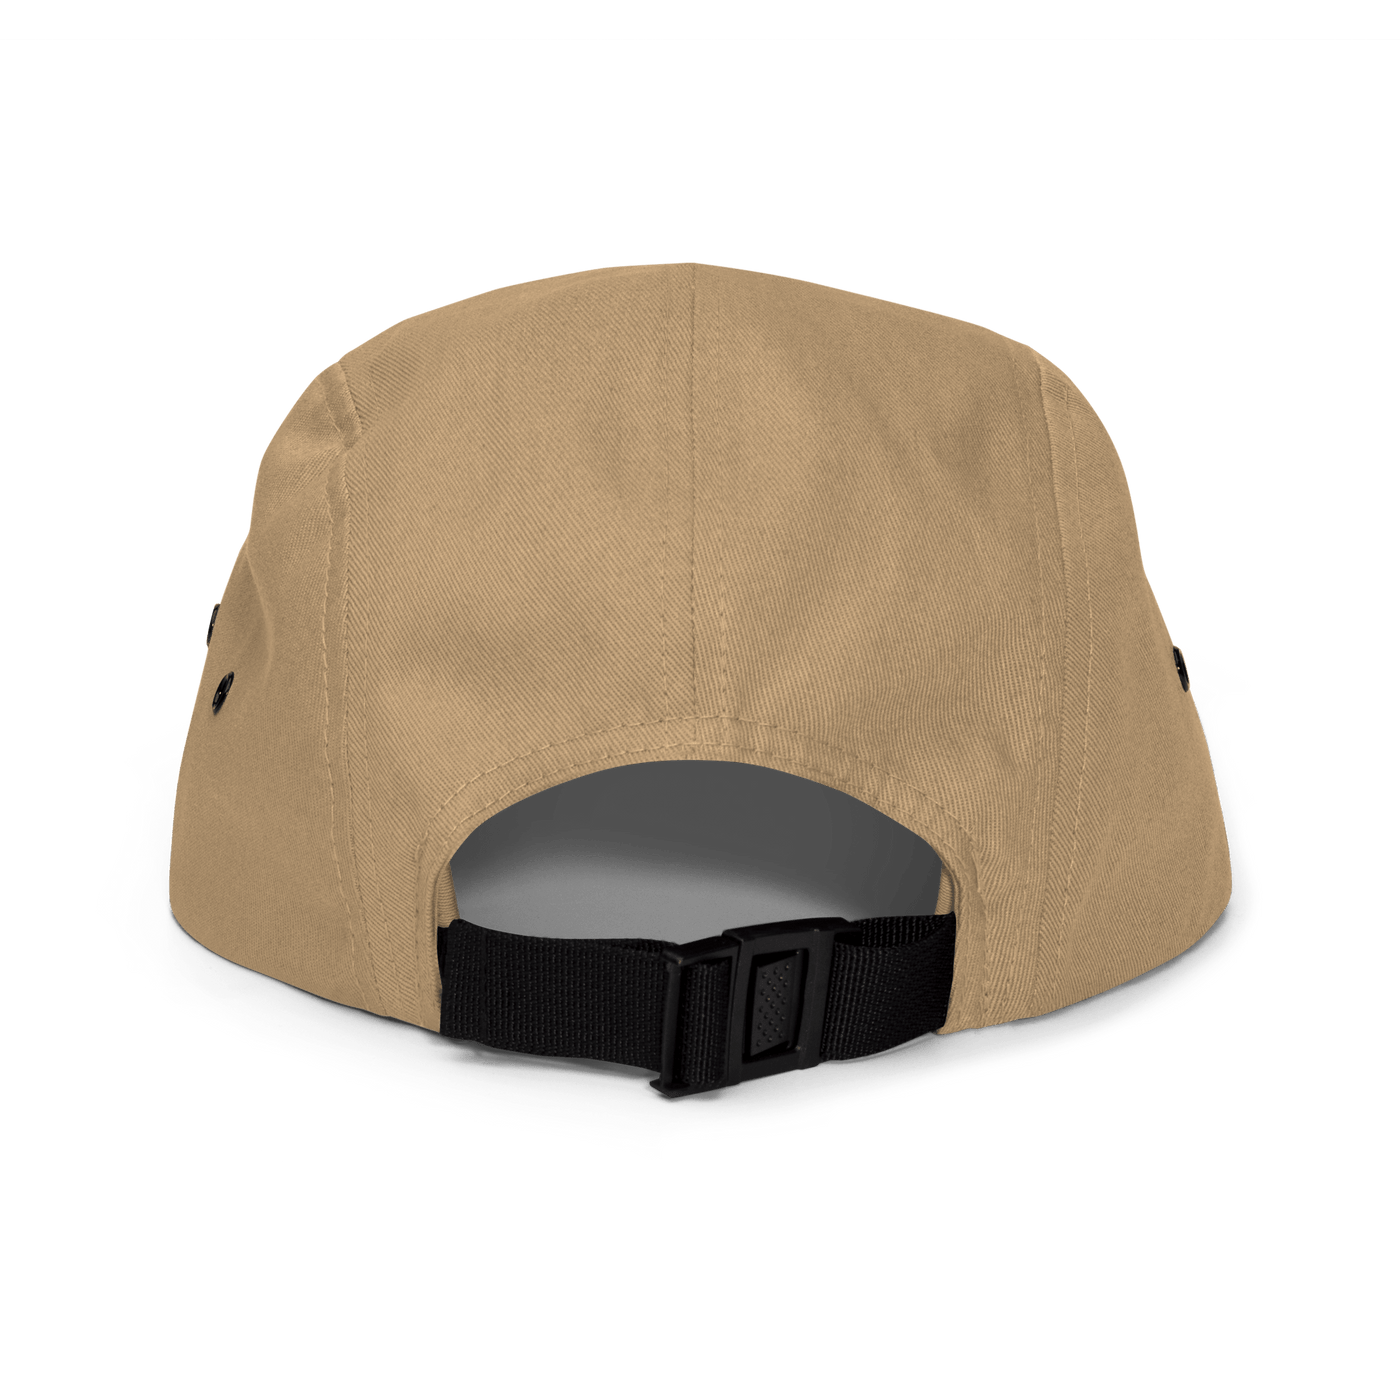 CEO of everything Five Panel Cap - Khaki - - Just Another Cap Store